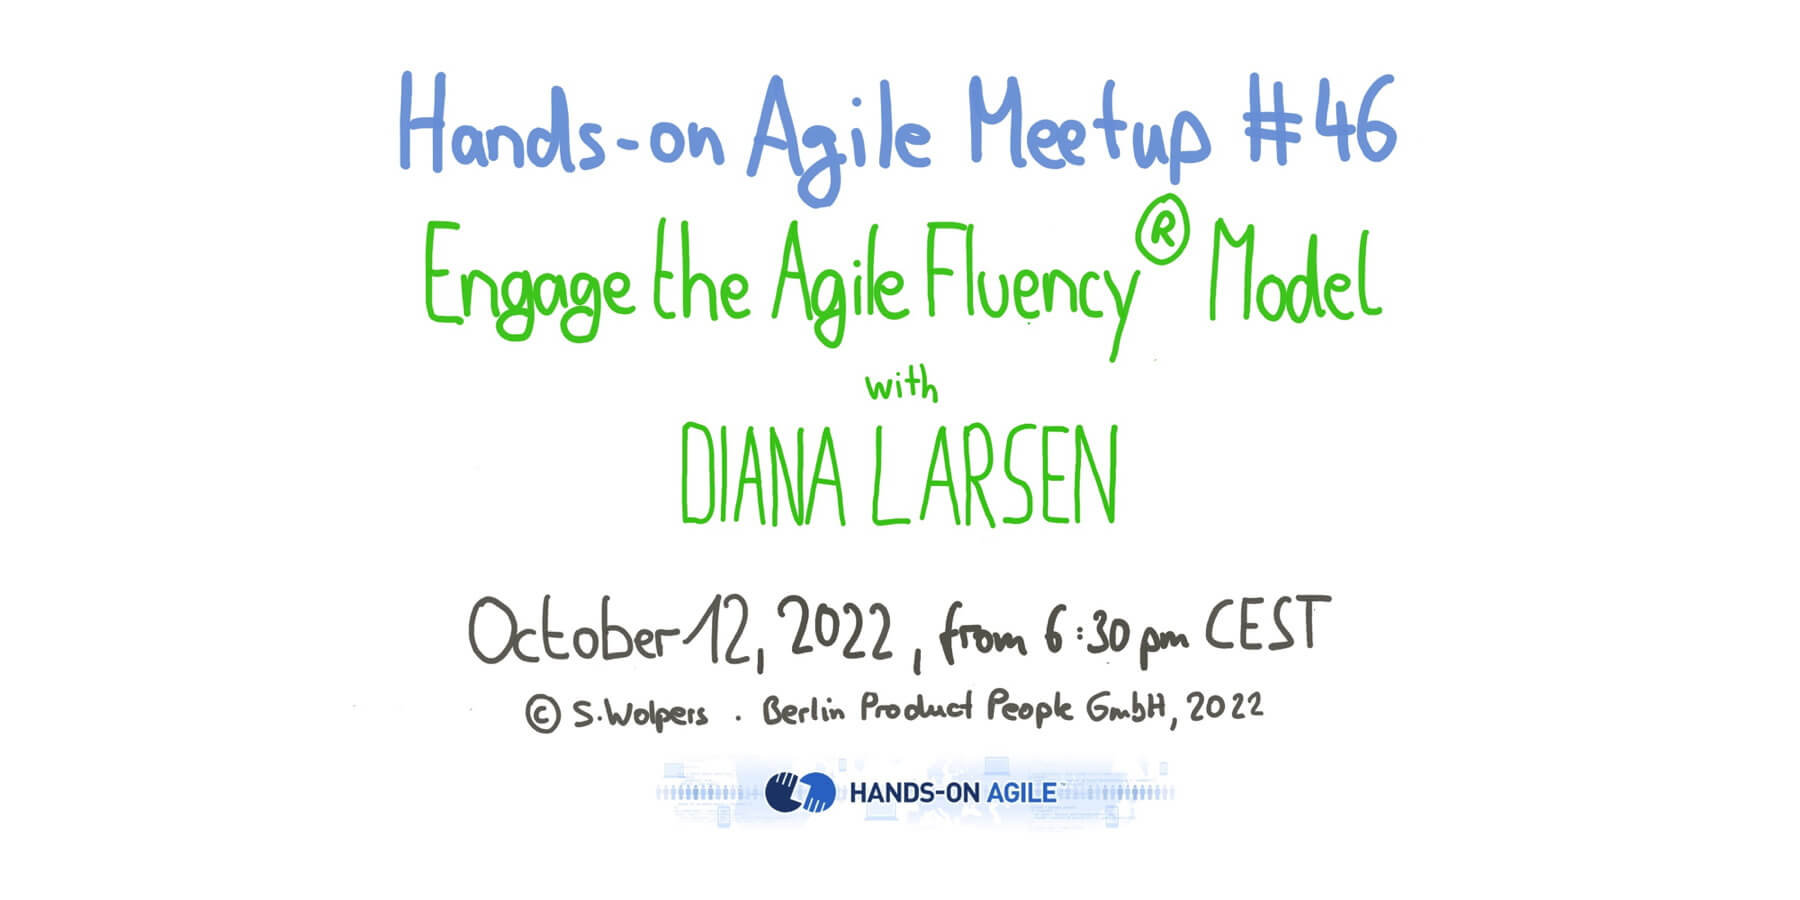 Hands-on Agile #46: Engage the Agile Fluency® Model with Diana Larsen — October 12, 2022, — Berlin Product People GmbH